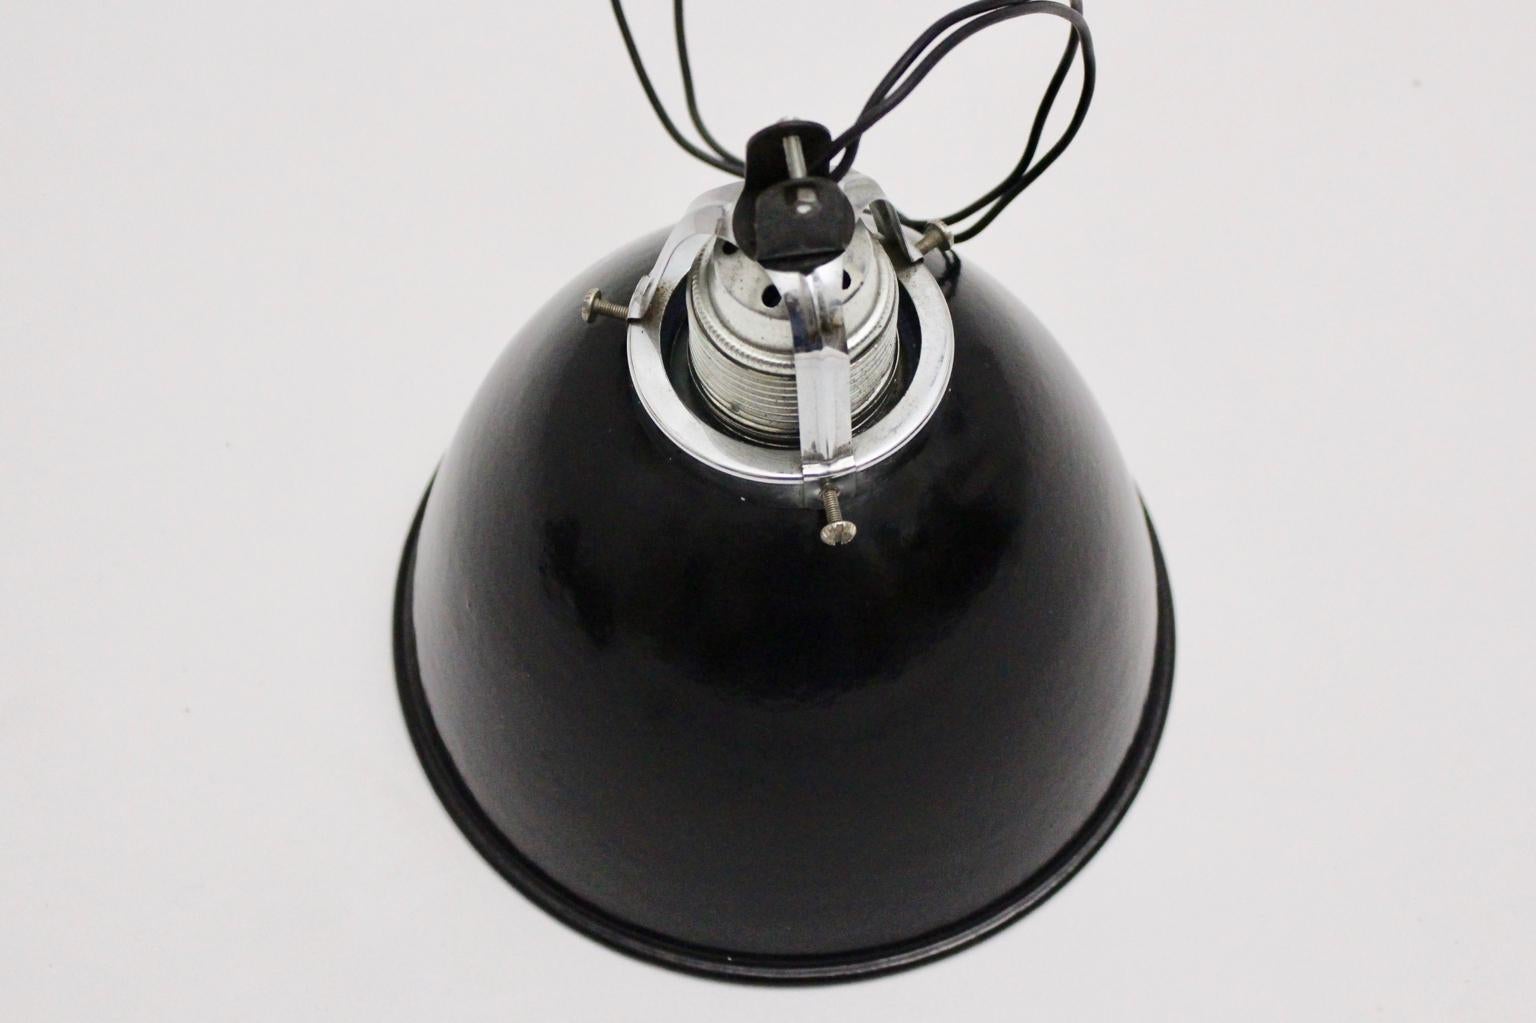 Bauhaus Vintage Black and White Email Hanging Lamp, 1920s, Germany In Good Condition For Sale In Vienna, AT